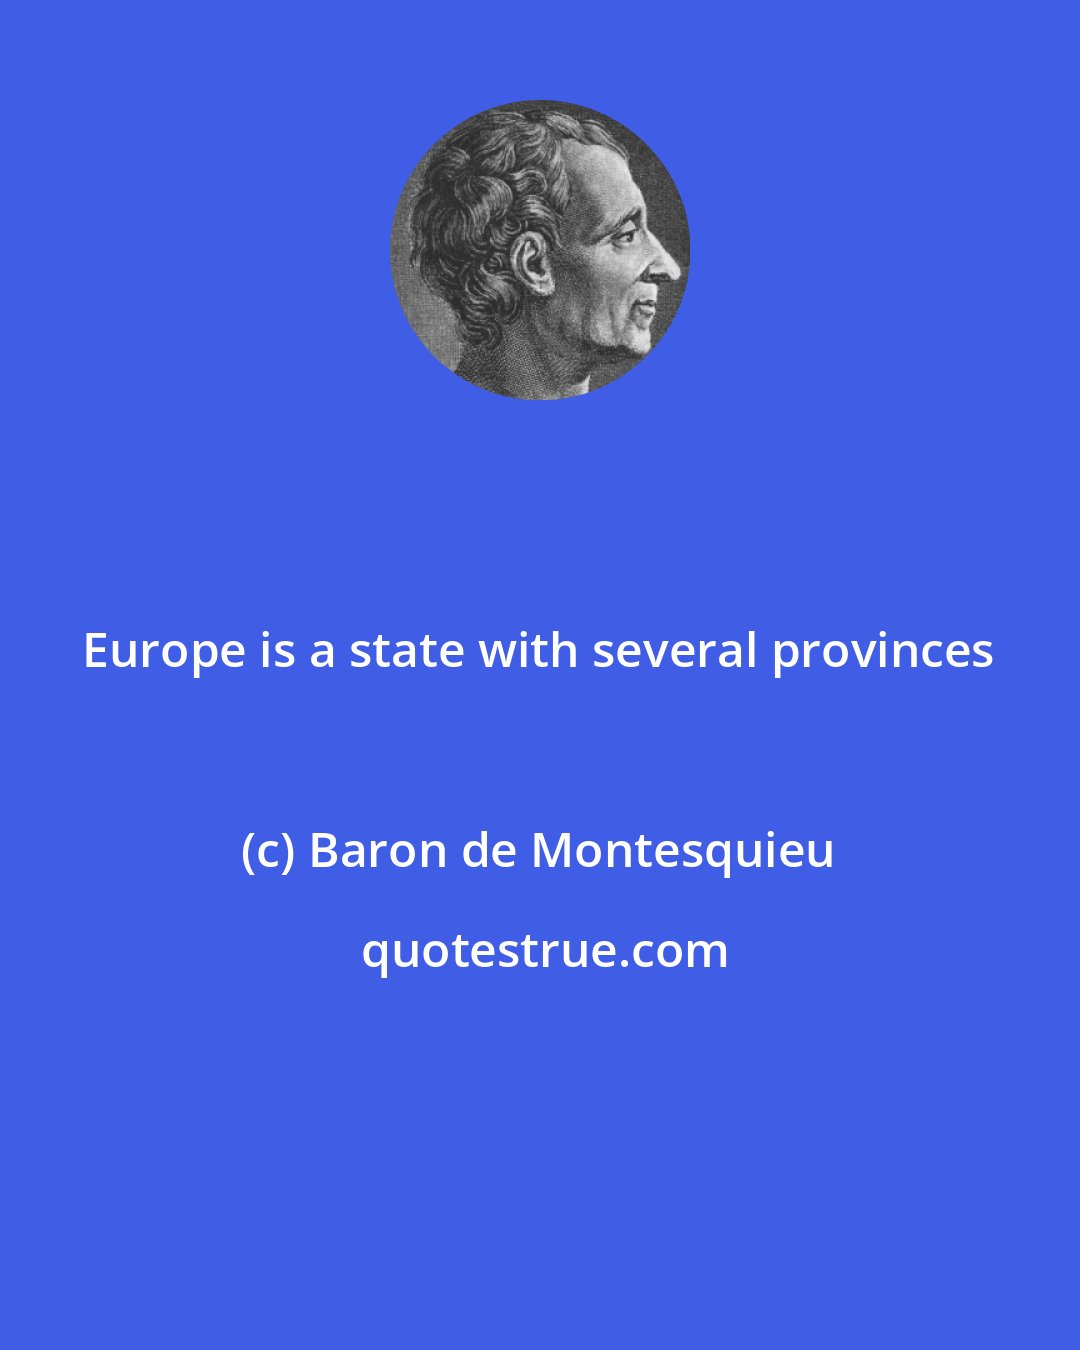 Baron de Montesquieu: Europe is a state with several provinces